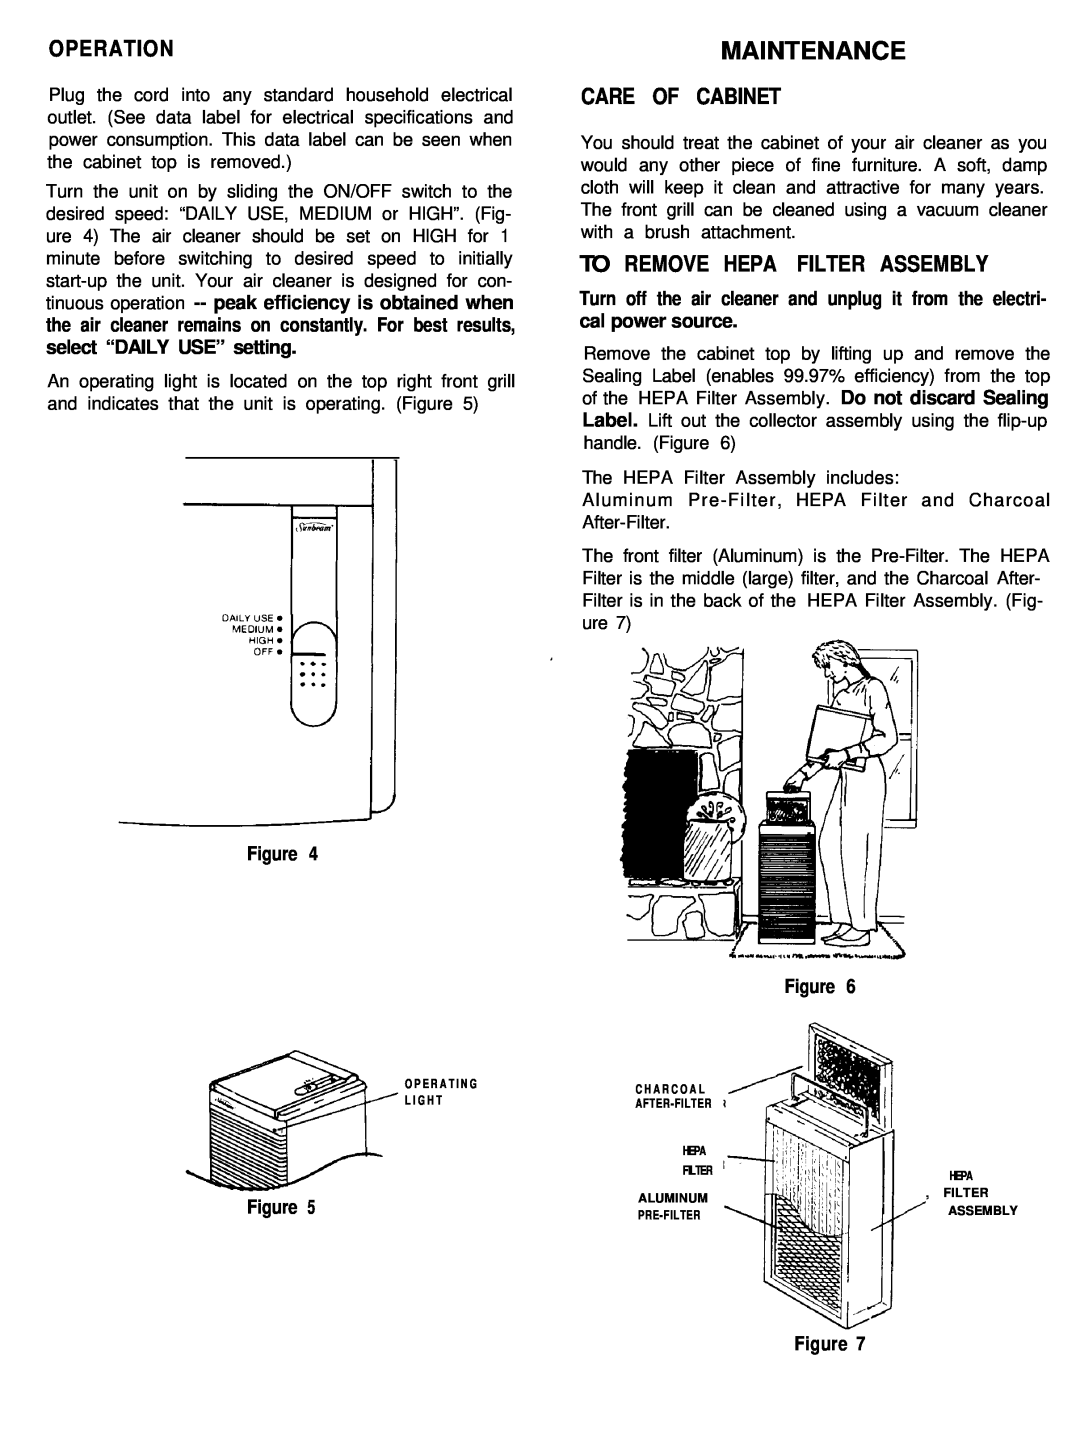 Sunbeam 2576 owner manual Operation, Care Of Cabinet, To Remove Hepa Filter Assembly, Figure Figure, Maintenance 